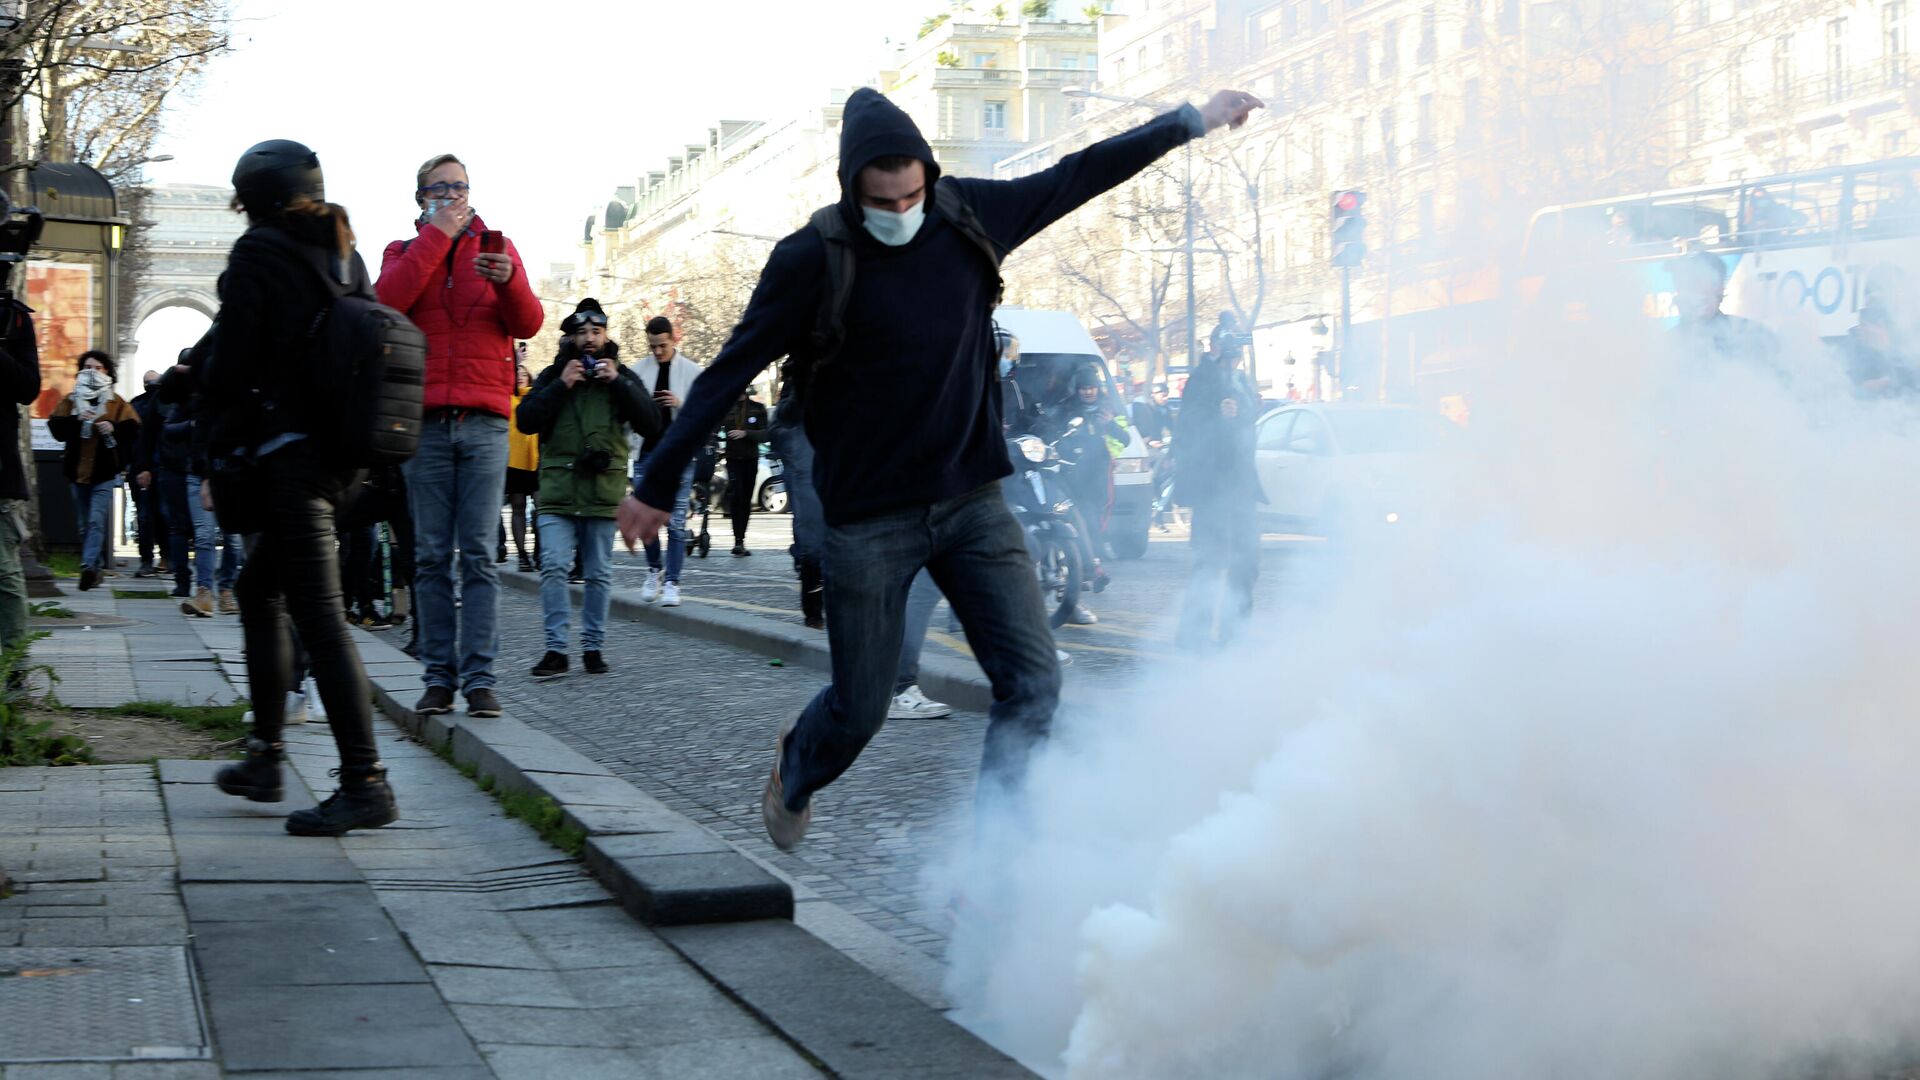 A demonstrator kicks in a tear gas grenade during a protest on the Champs-Elysees avenue, Saturday, Feb.12, 2022 in Paris. Paris police intercepted at least 500 vehicles attempting to enter the French capital in defiance of a police order to take part in protests against virus restrictions inspired by the Canada's horn-honking Freedom Convoy. - Sputnik International, 1920, 13.02.2022